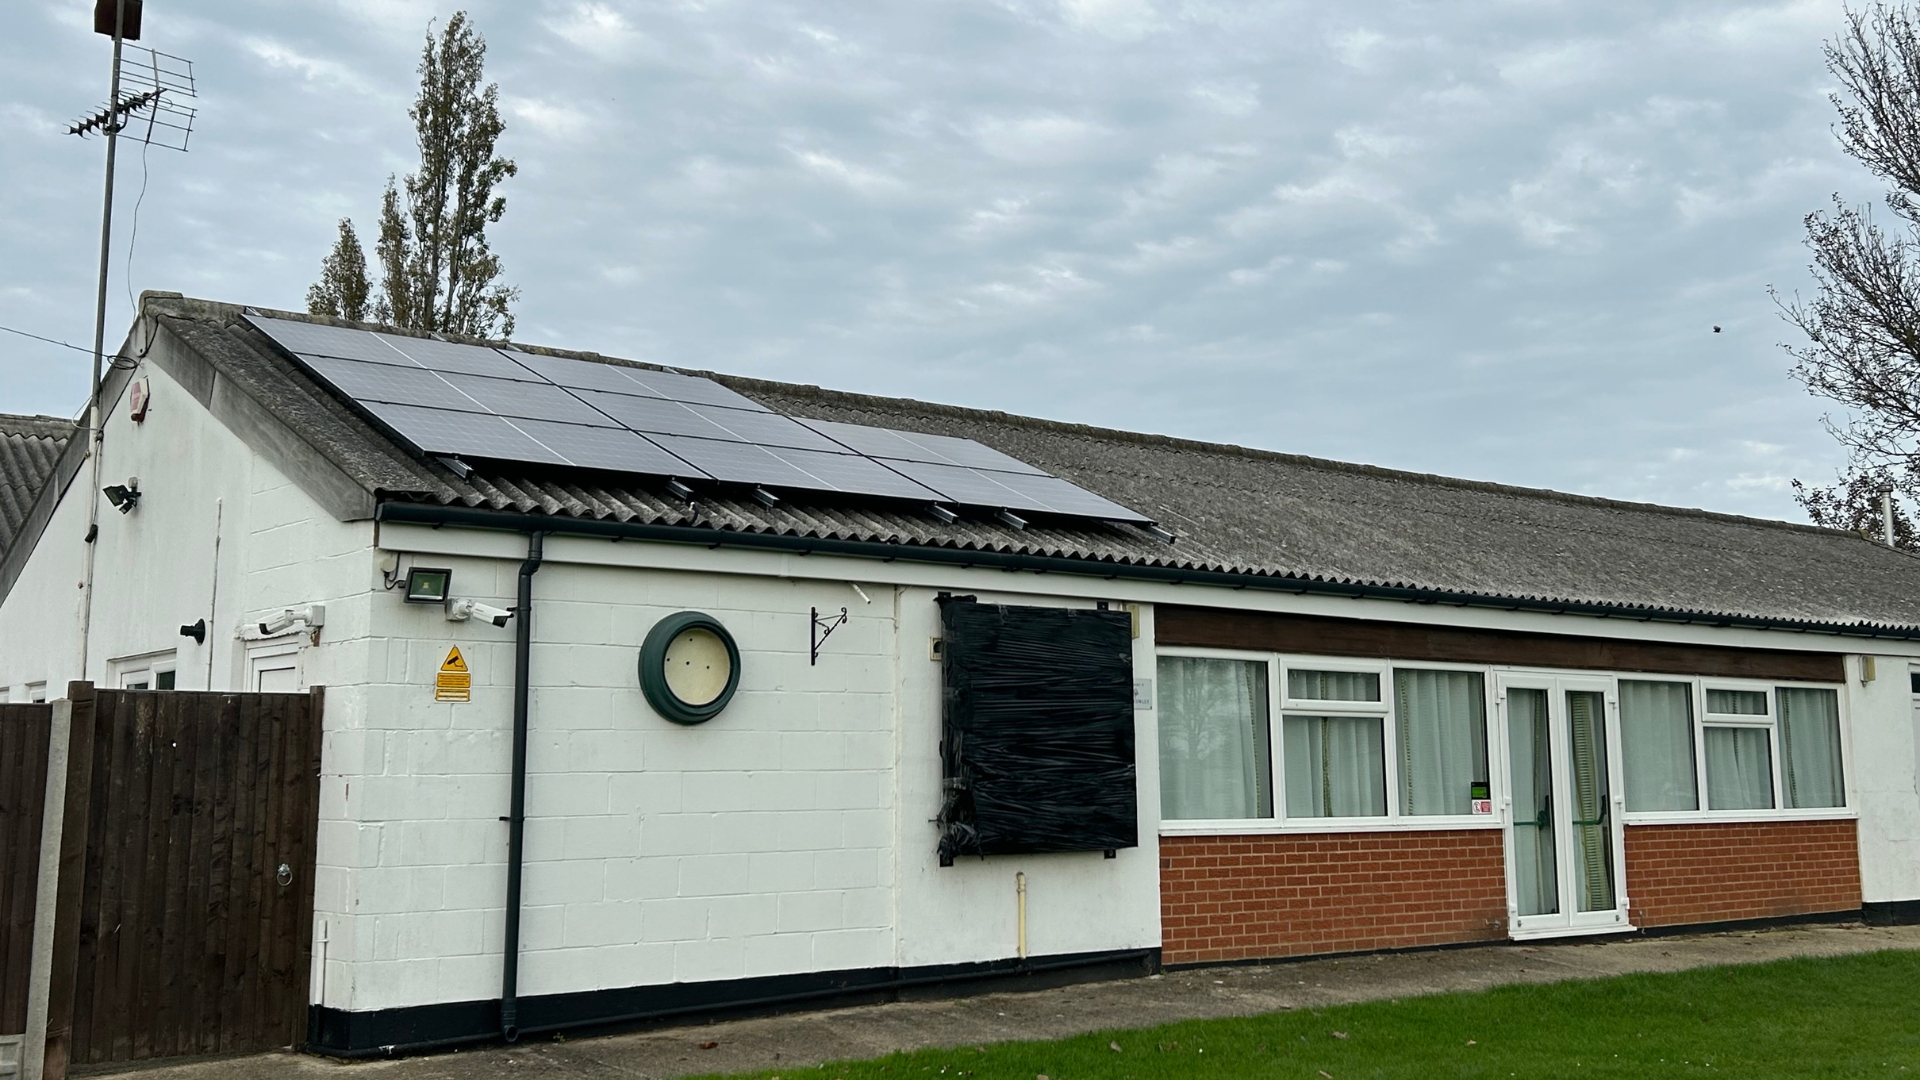 Down Hatherley CC pavilion with new Solar Panels